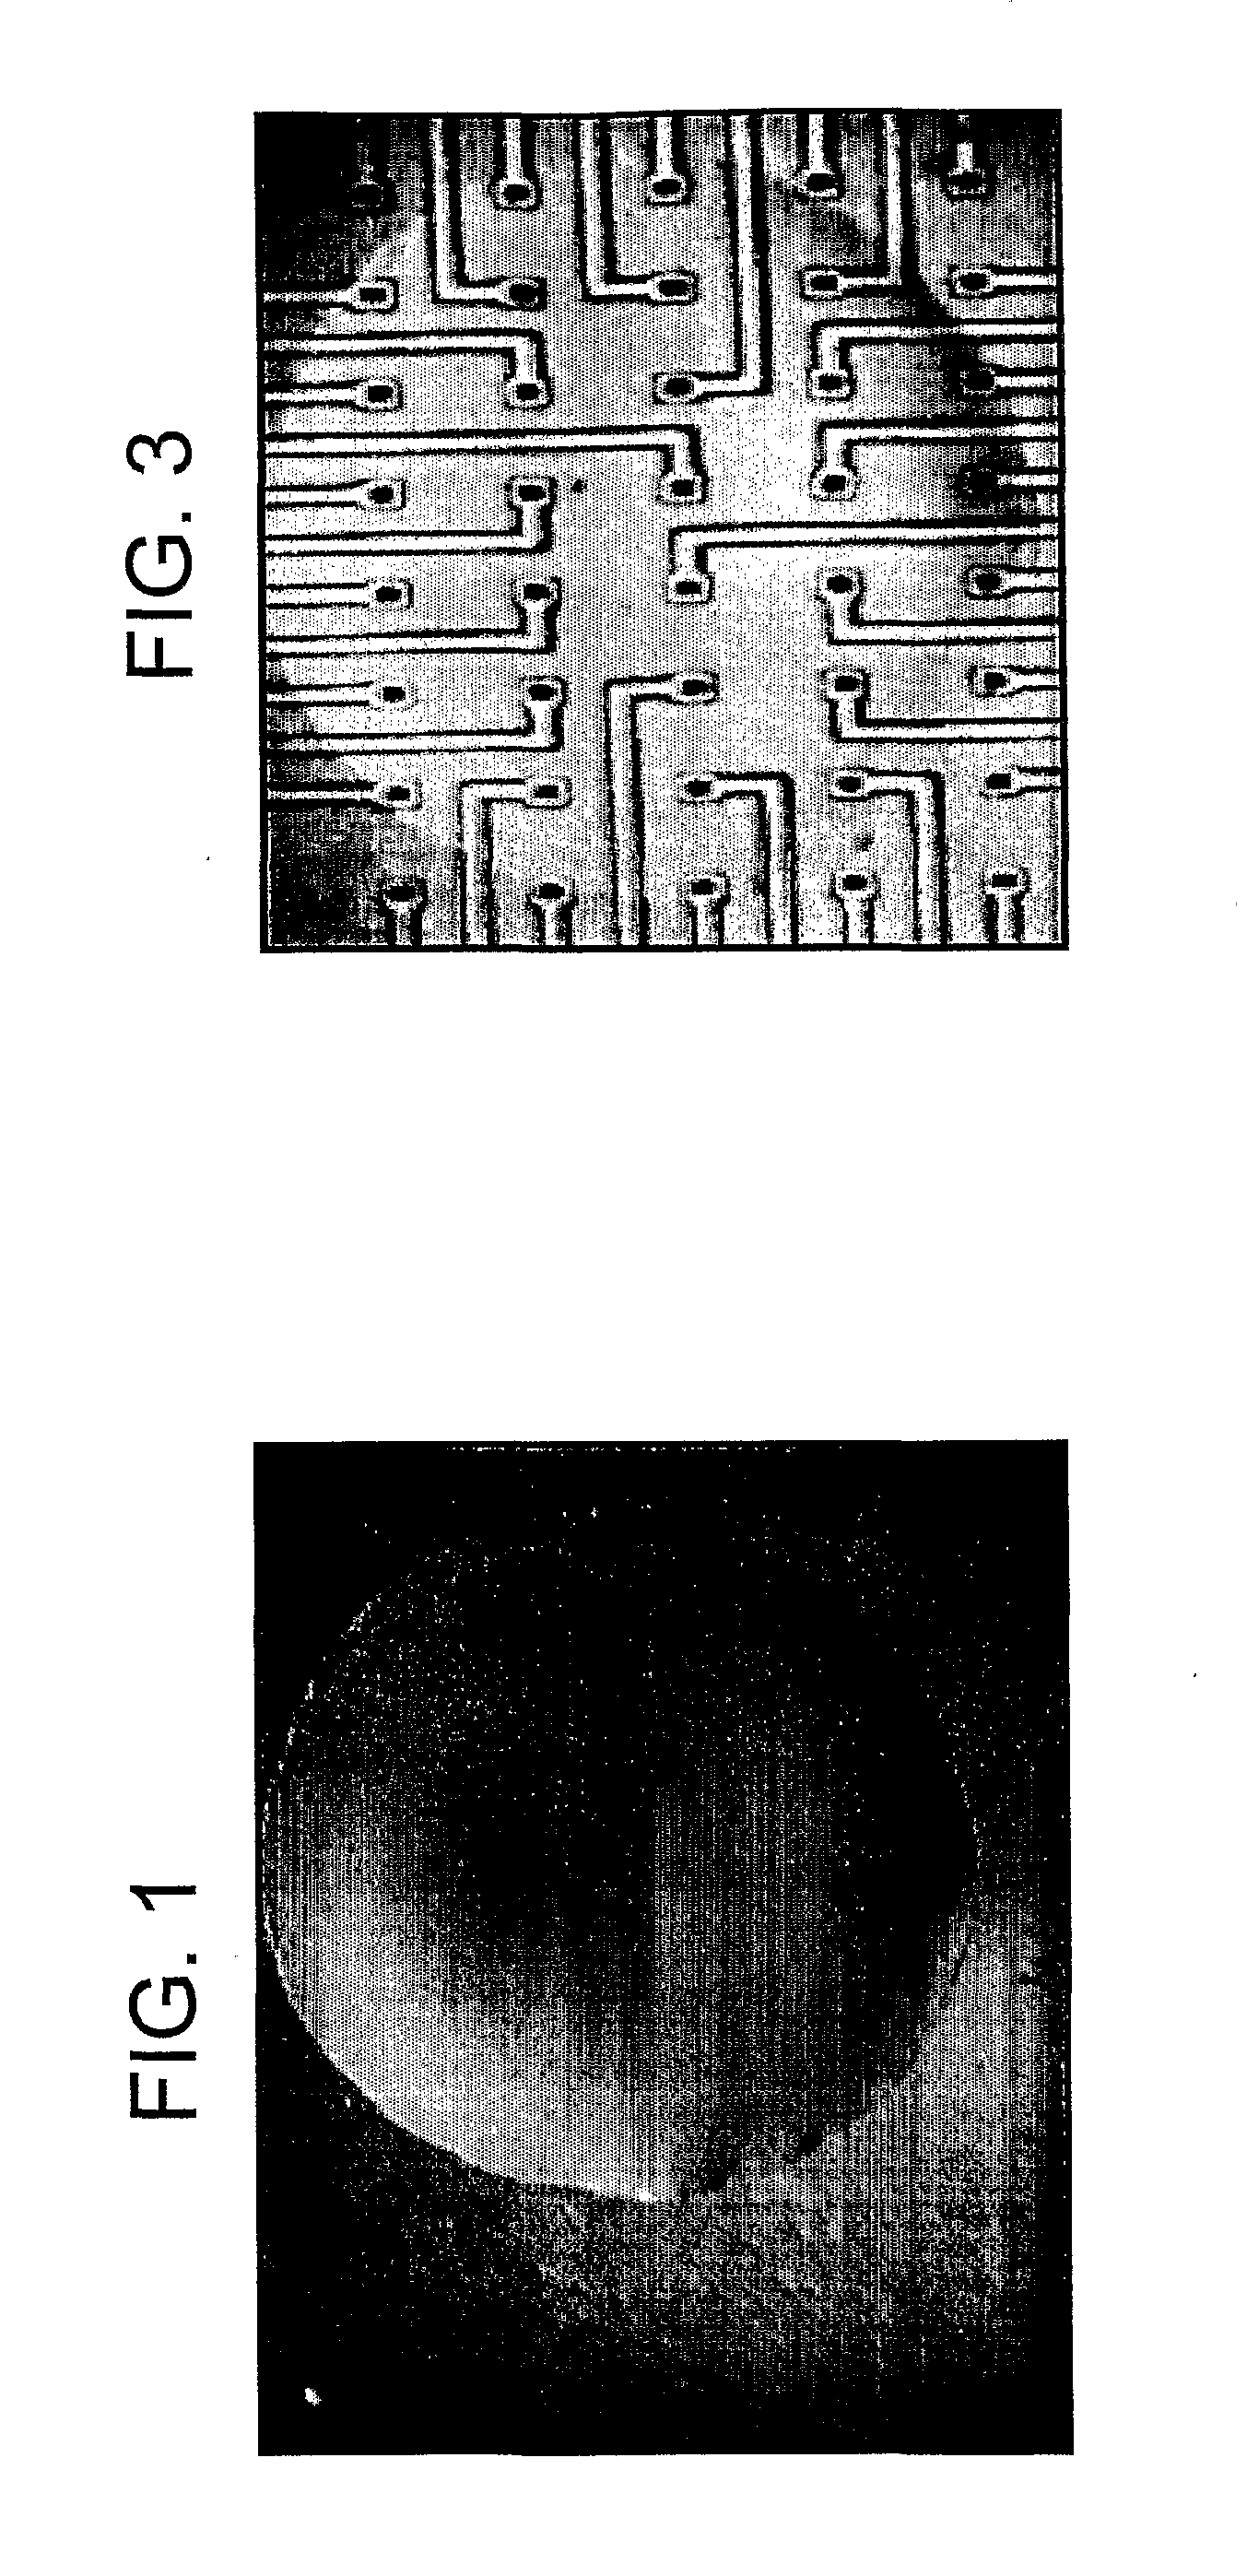 Method of Producing Organotypic Cell Cultures